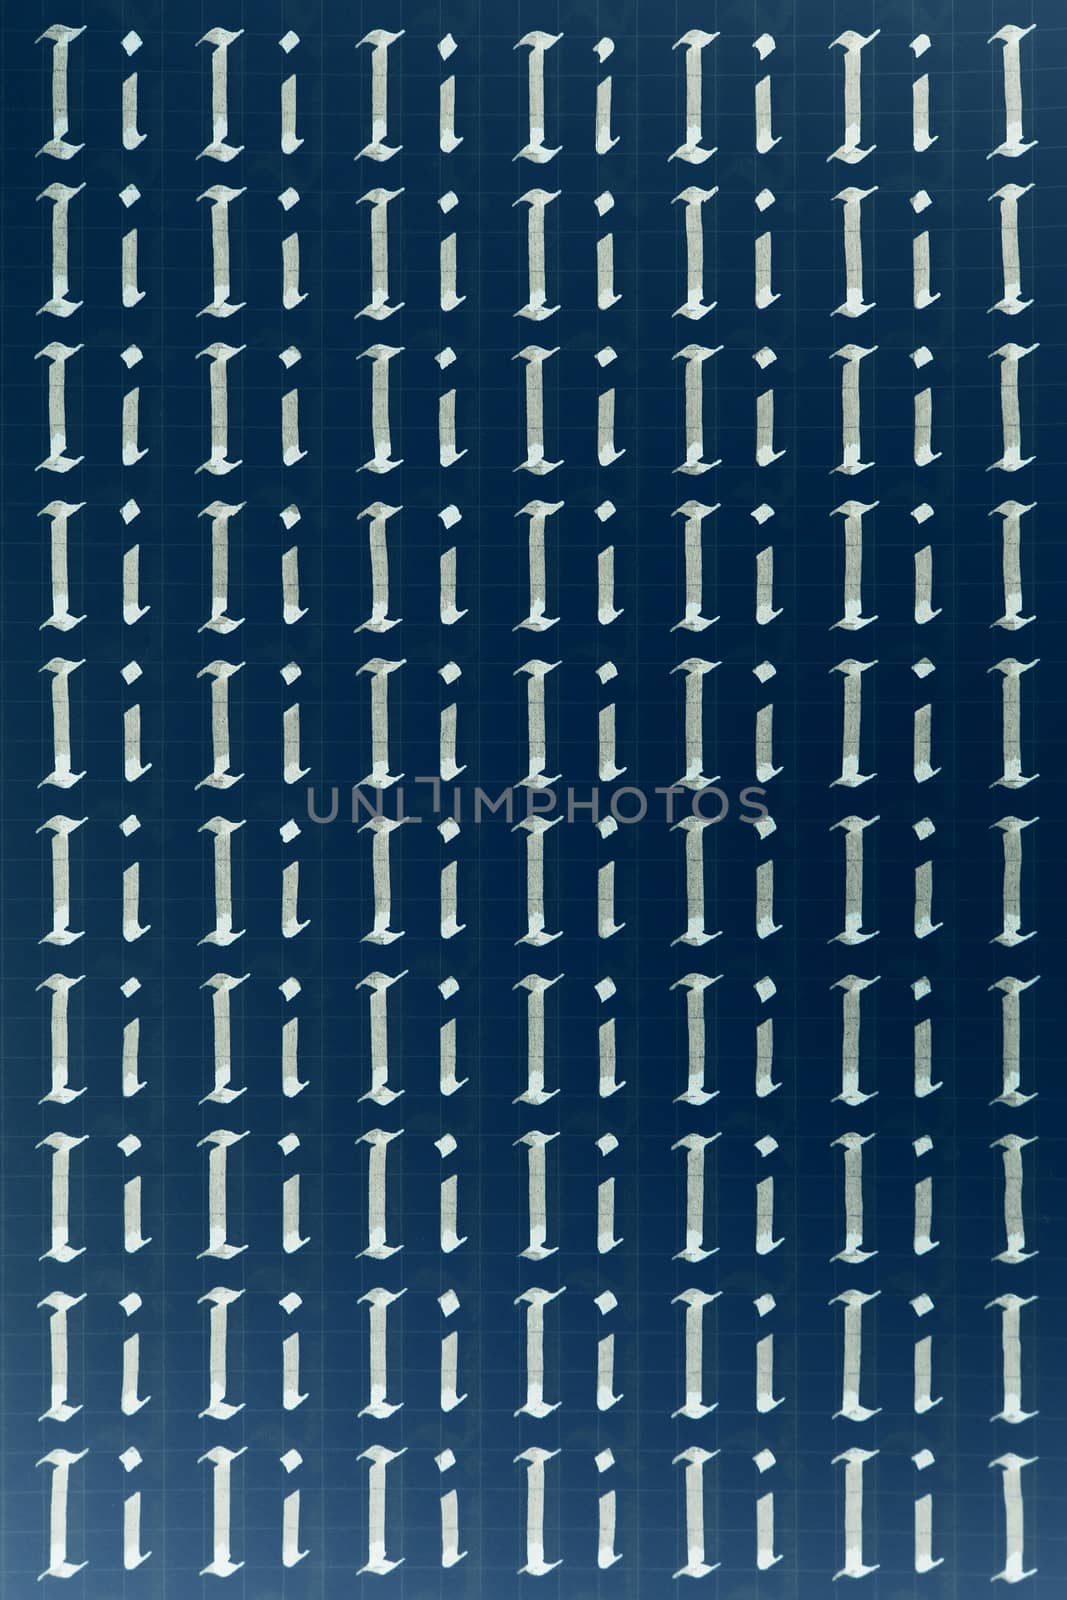 Calligraphic white on dark blue letter I learning skills paper page. Calligraphy letters i background. Lettering practice writing worksheet. Handwriting symbol filling pattern.